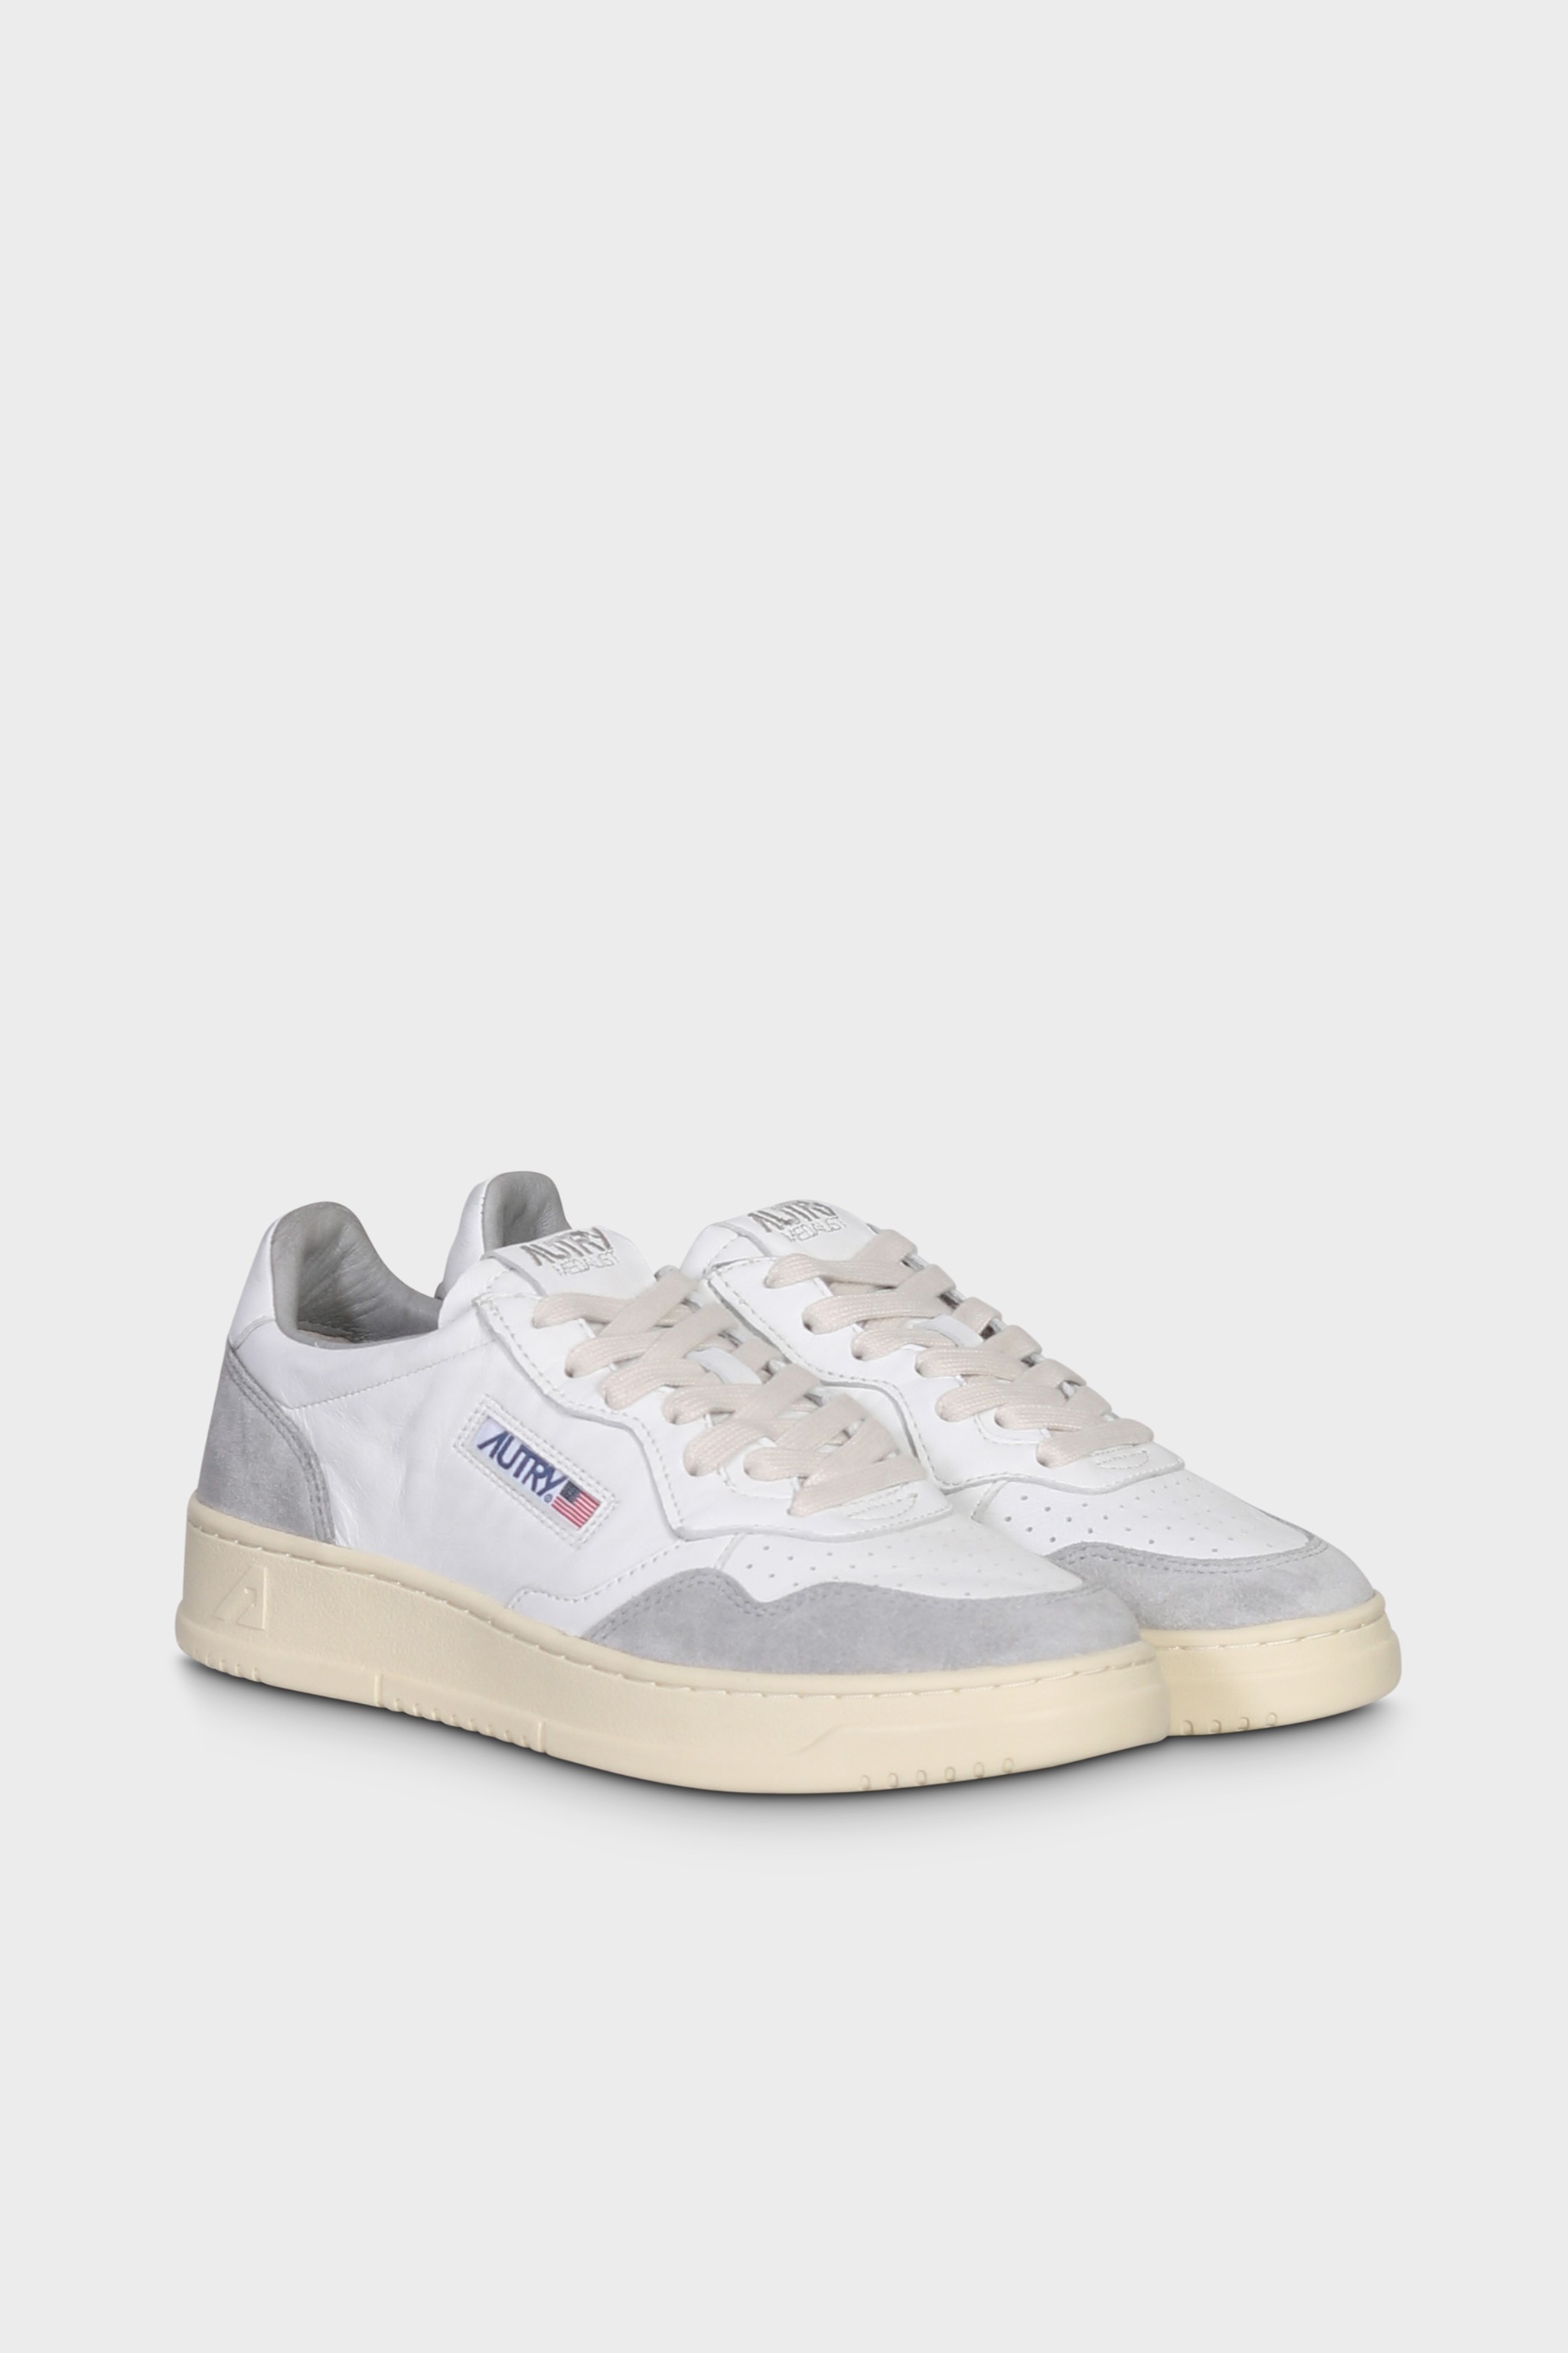 AUTRY ACTION SHOES Medalist Low Sneaker Goat Suede White/Grey 42